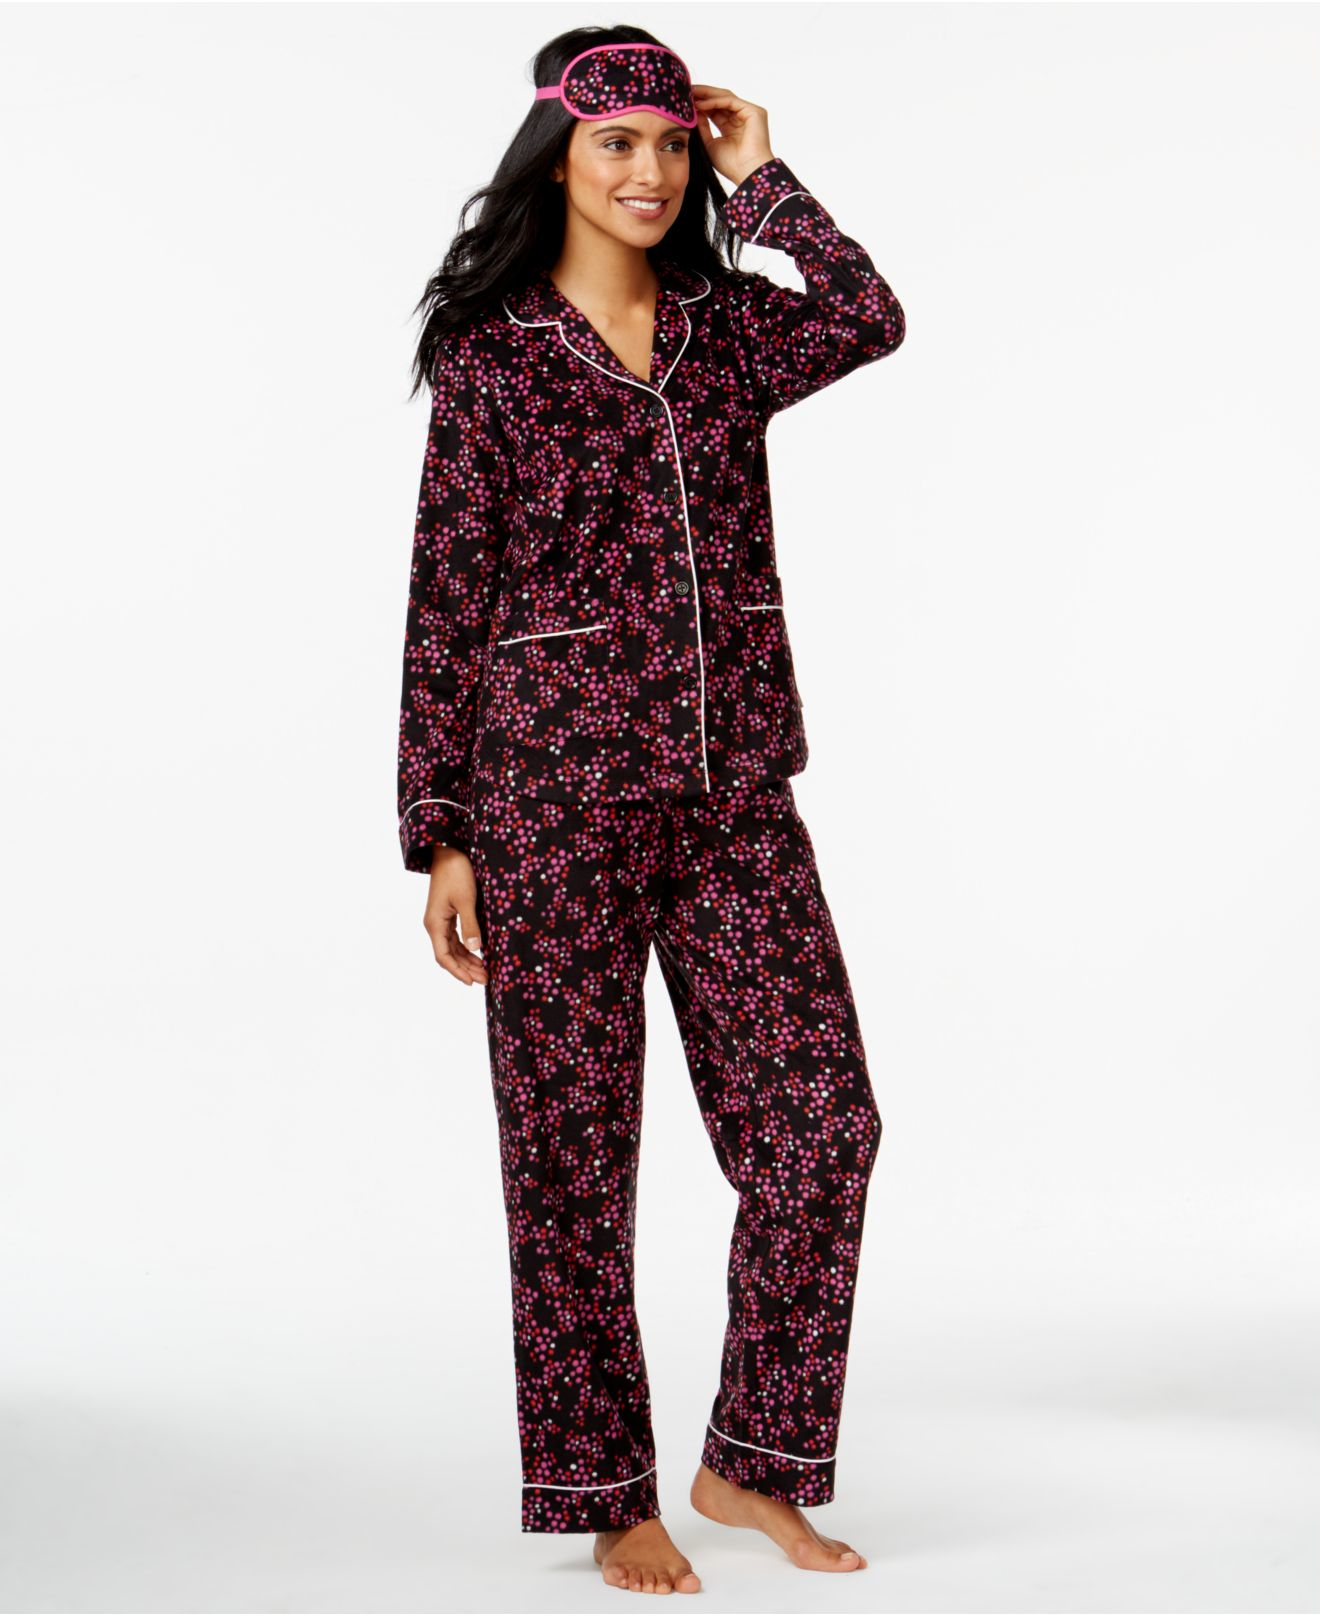 Dkny Top And Pajama Pants Set With Matching Eyemask in Black (Multi Dot ...